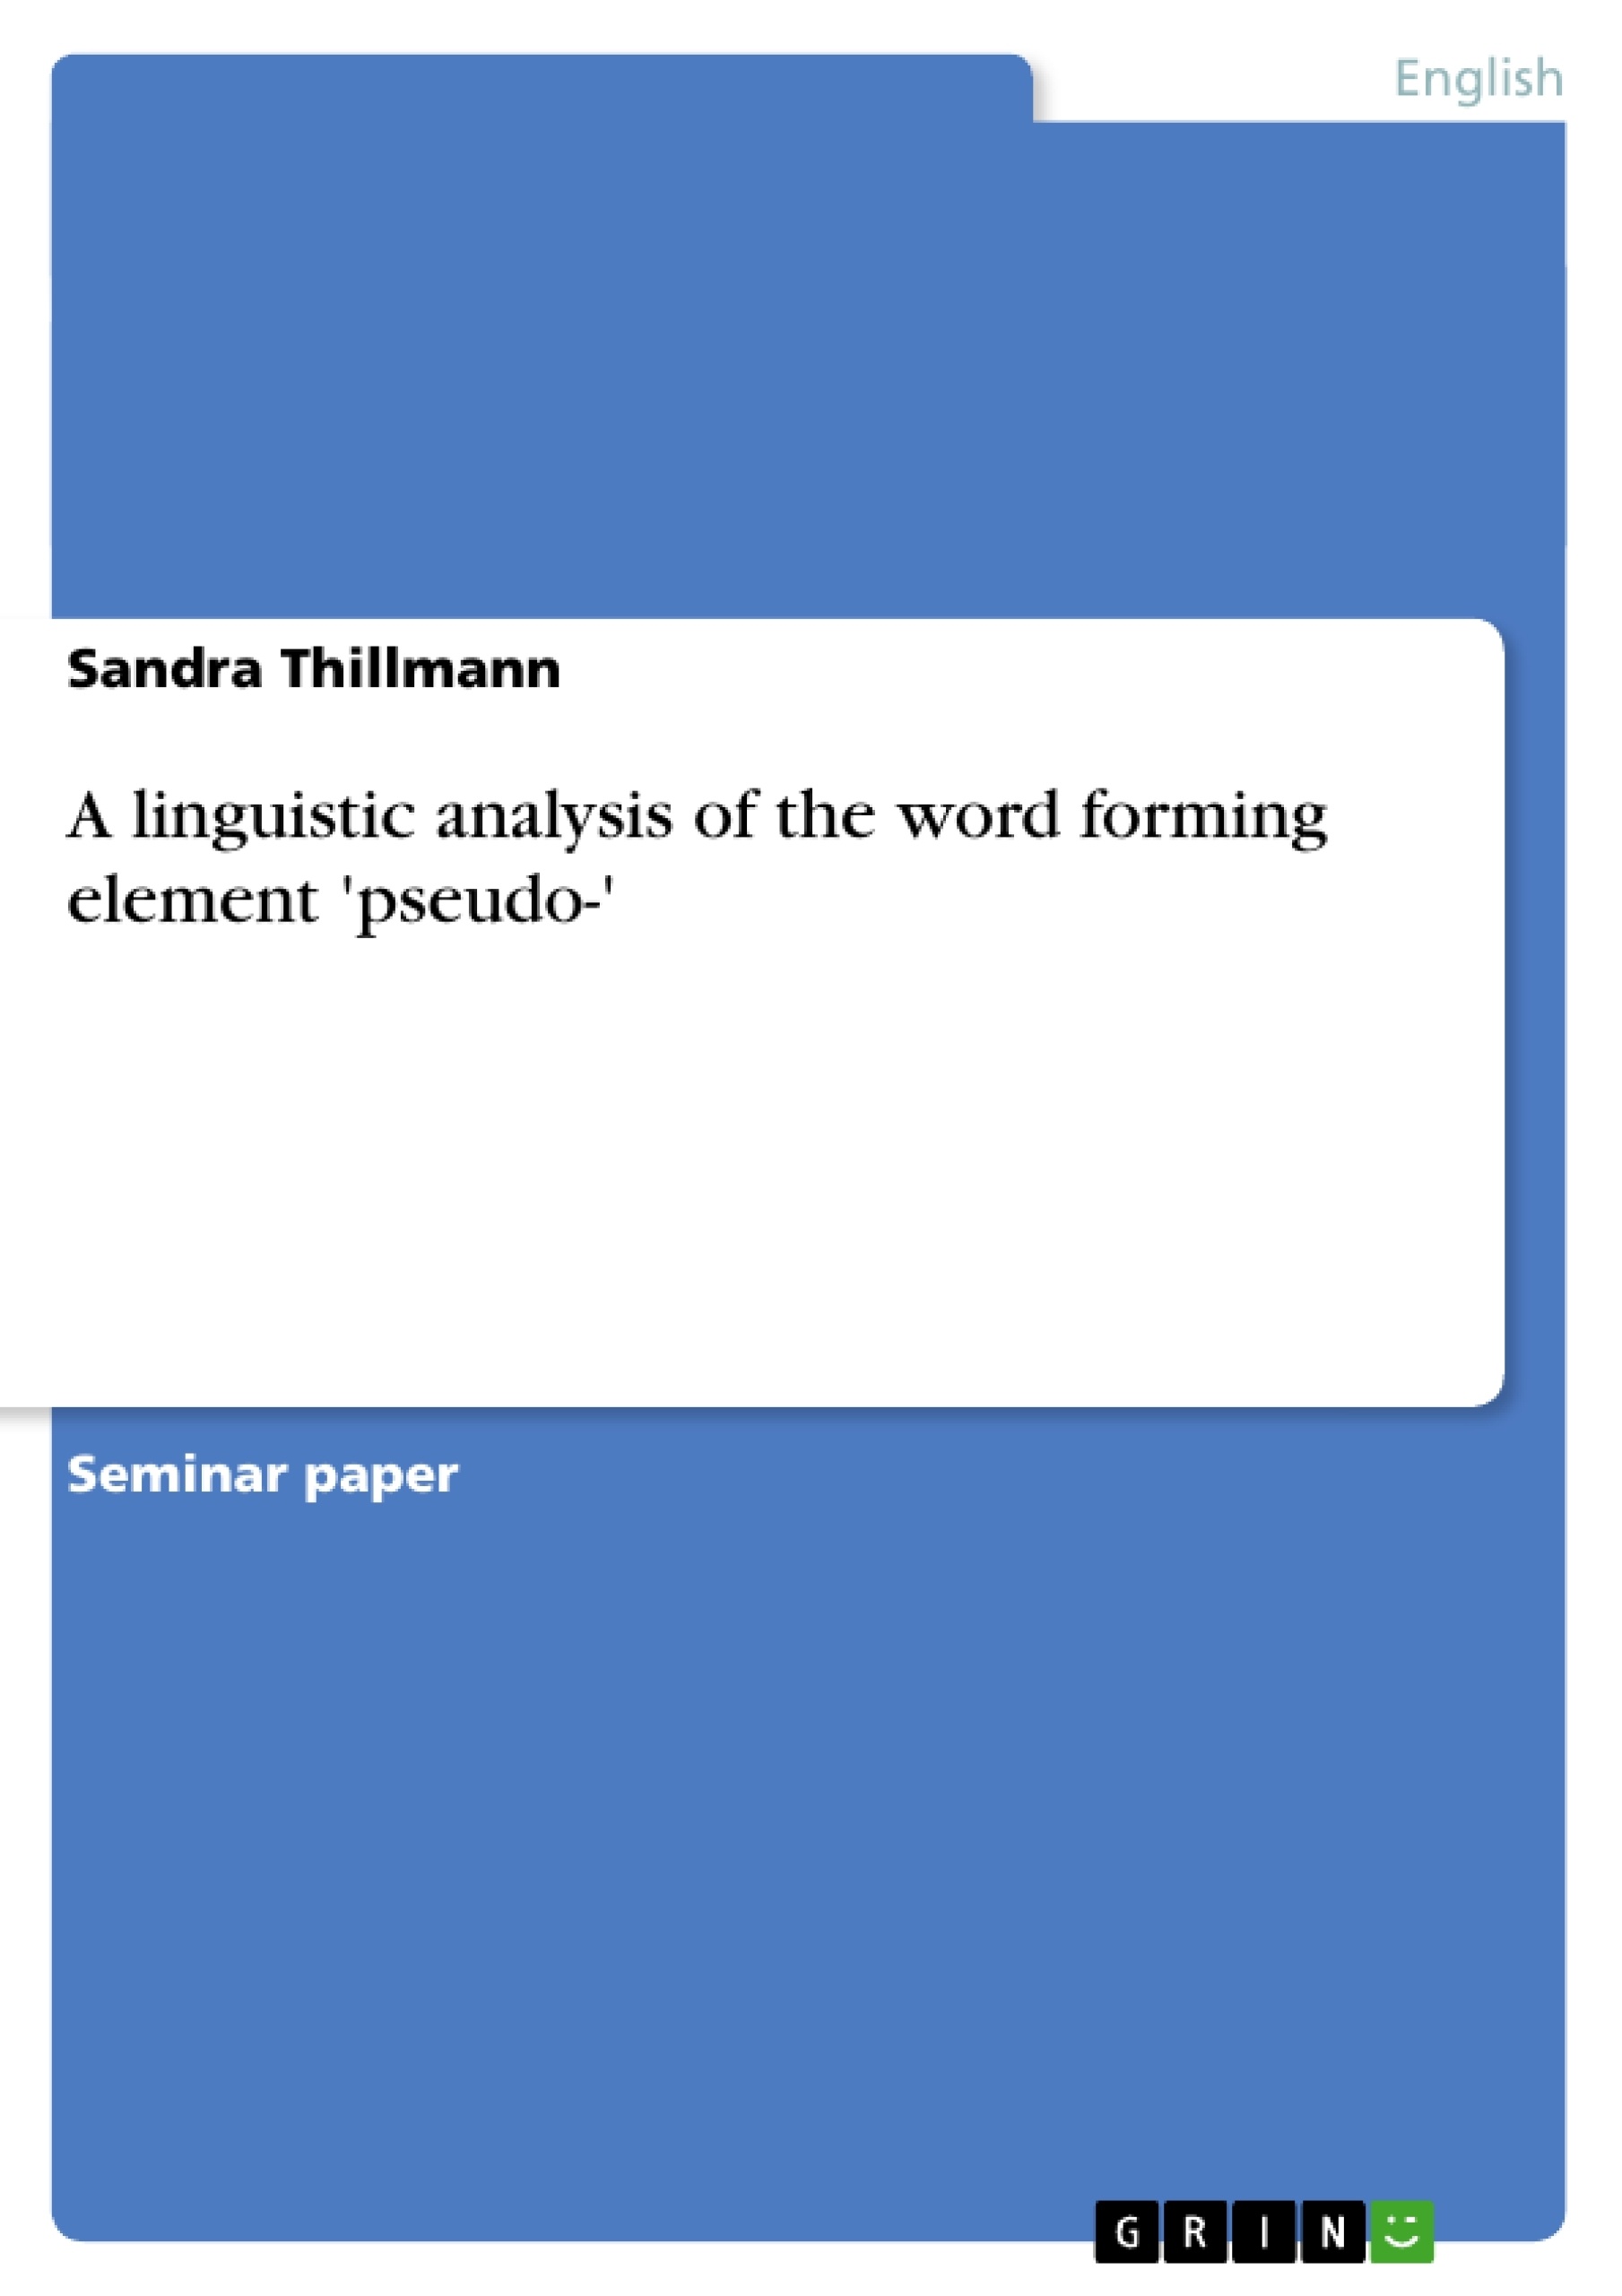 Titel: A linguistic analysis of the word forming element 'pseudo-'